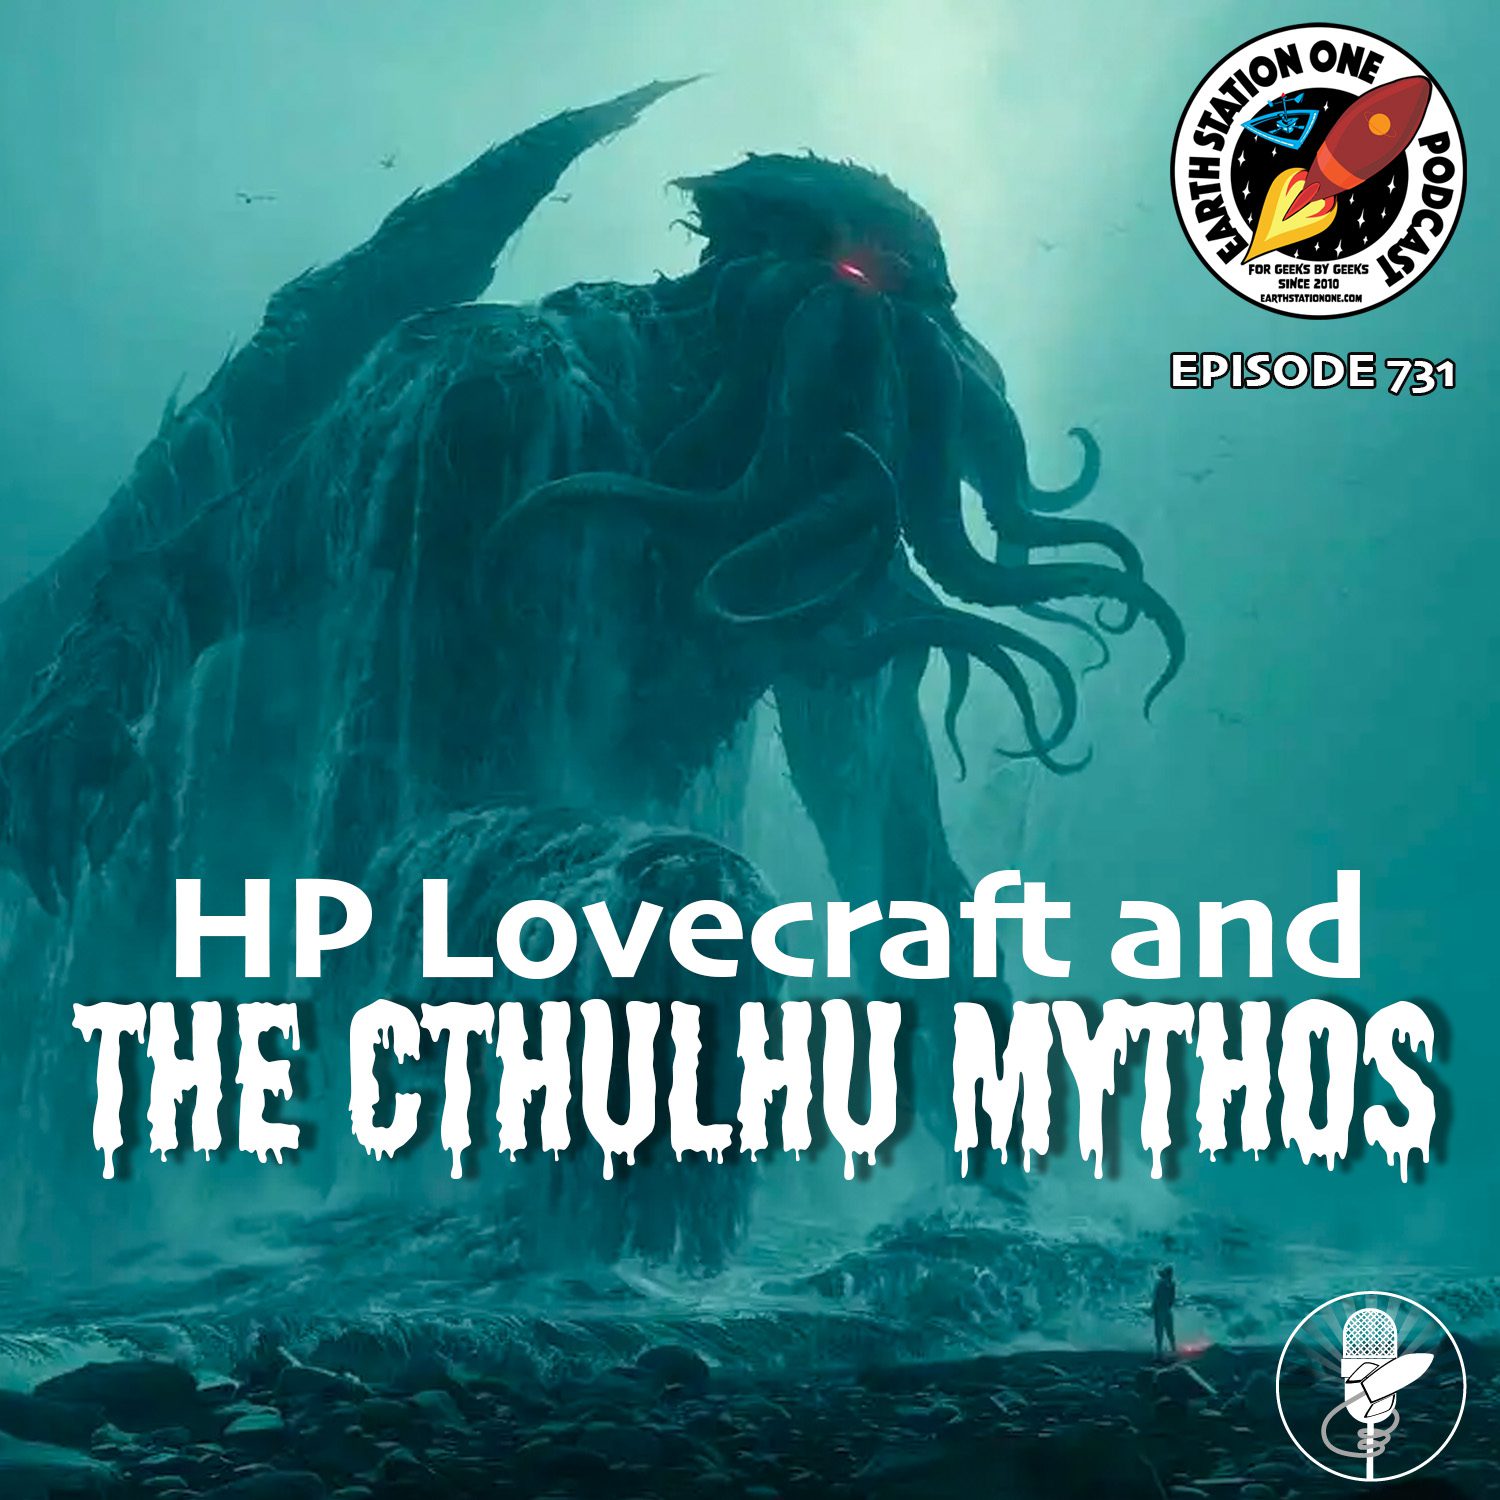 HP Lovecraft and The Cthulhu Mythos - Earth Station One Ep 731